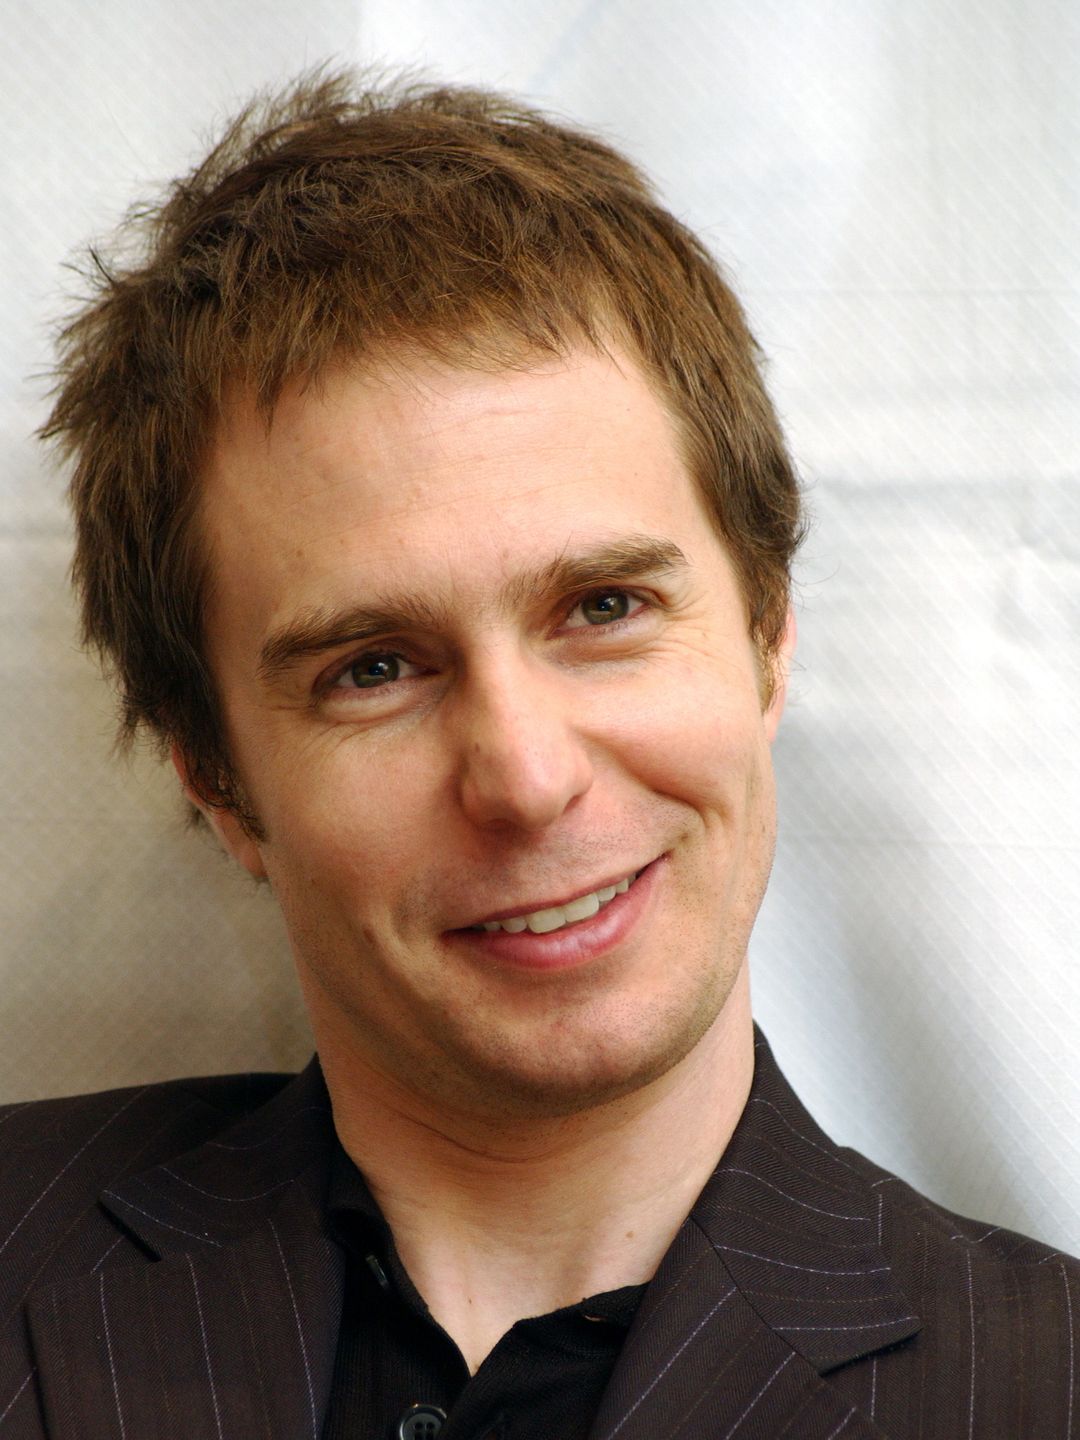 Sam Rockwell young photos